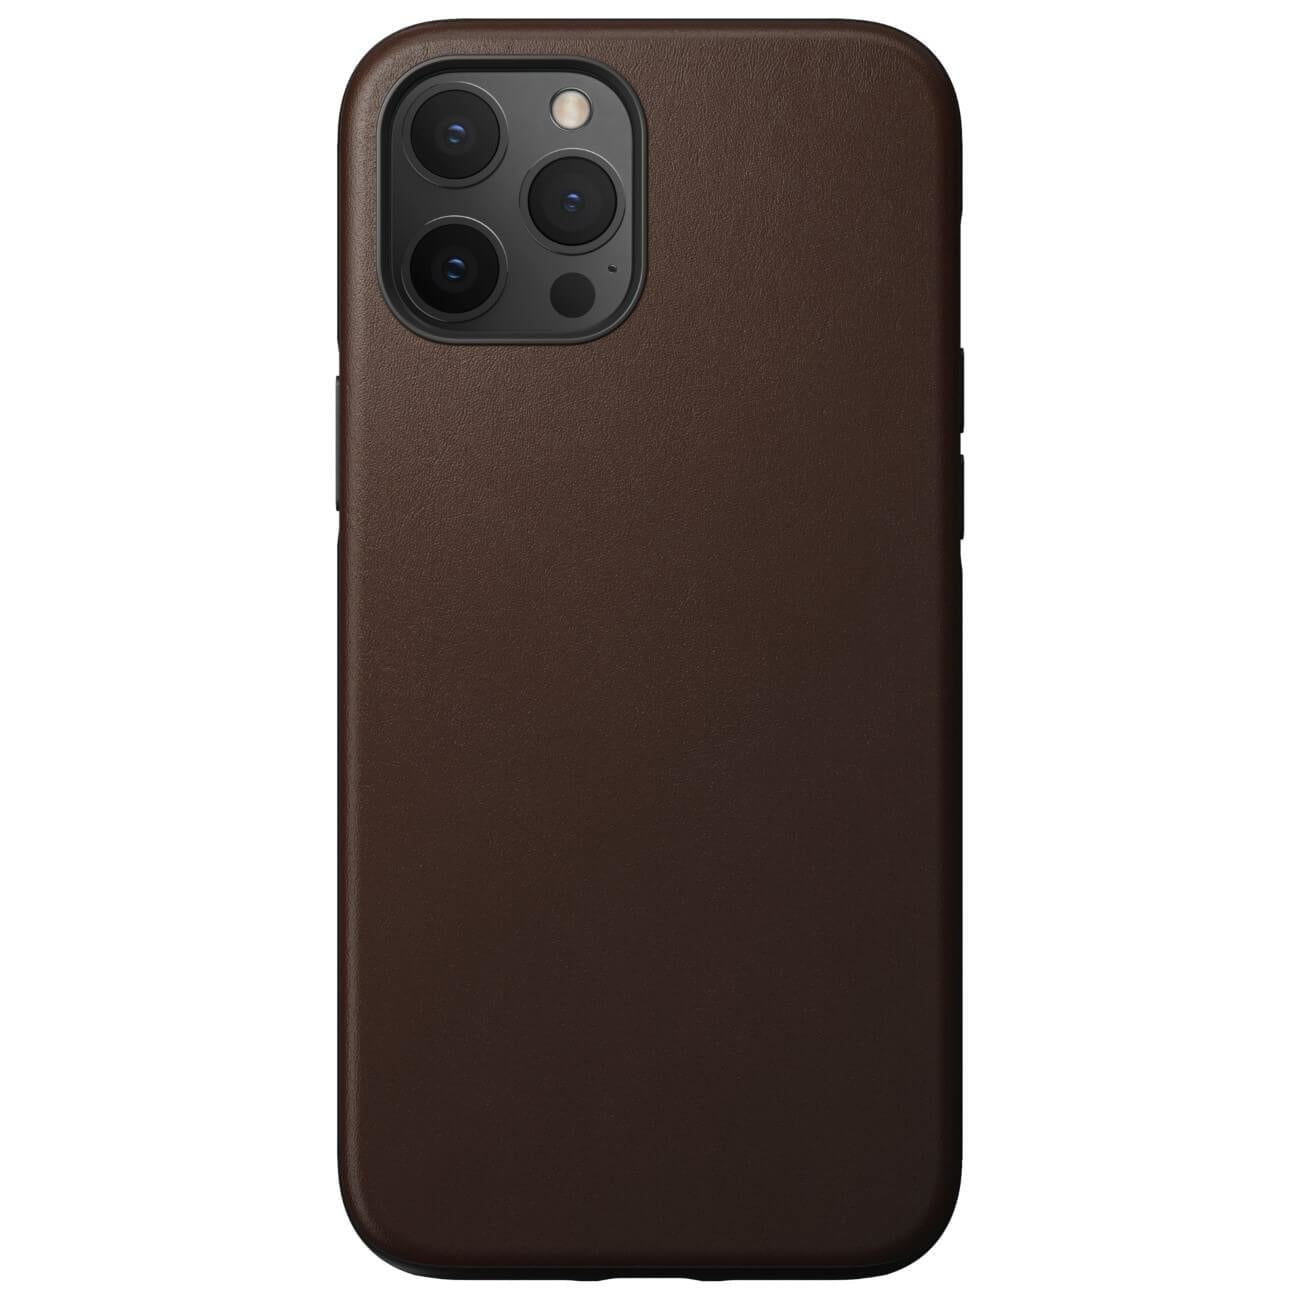 Husa Piele Naturala Nomad Rugged - iPhone 12 Pro Max - Brown - NM21hR0R00 - 856500019253 - 9